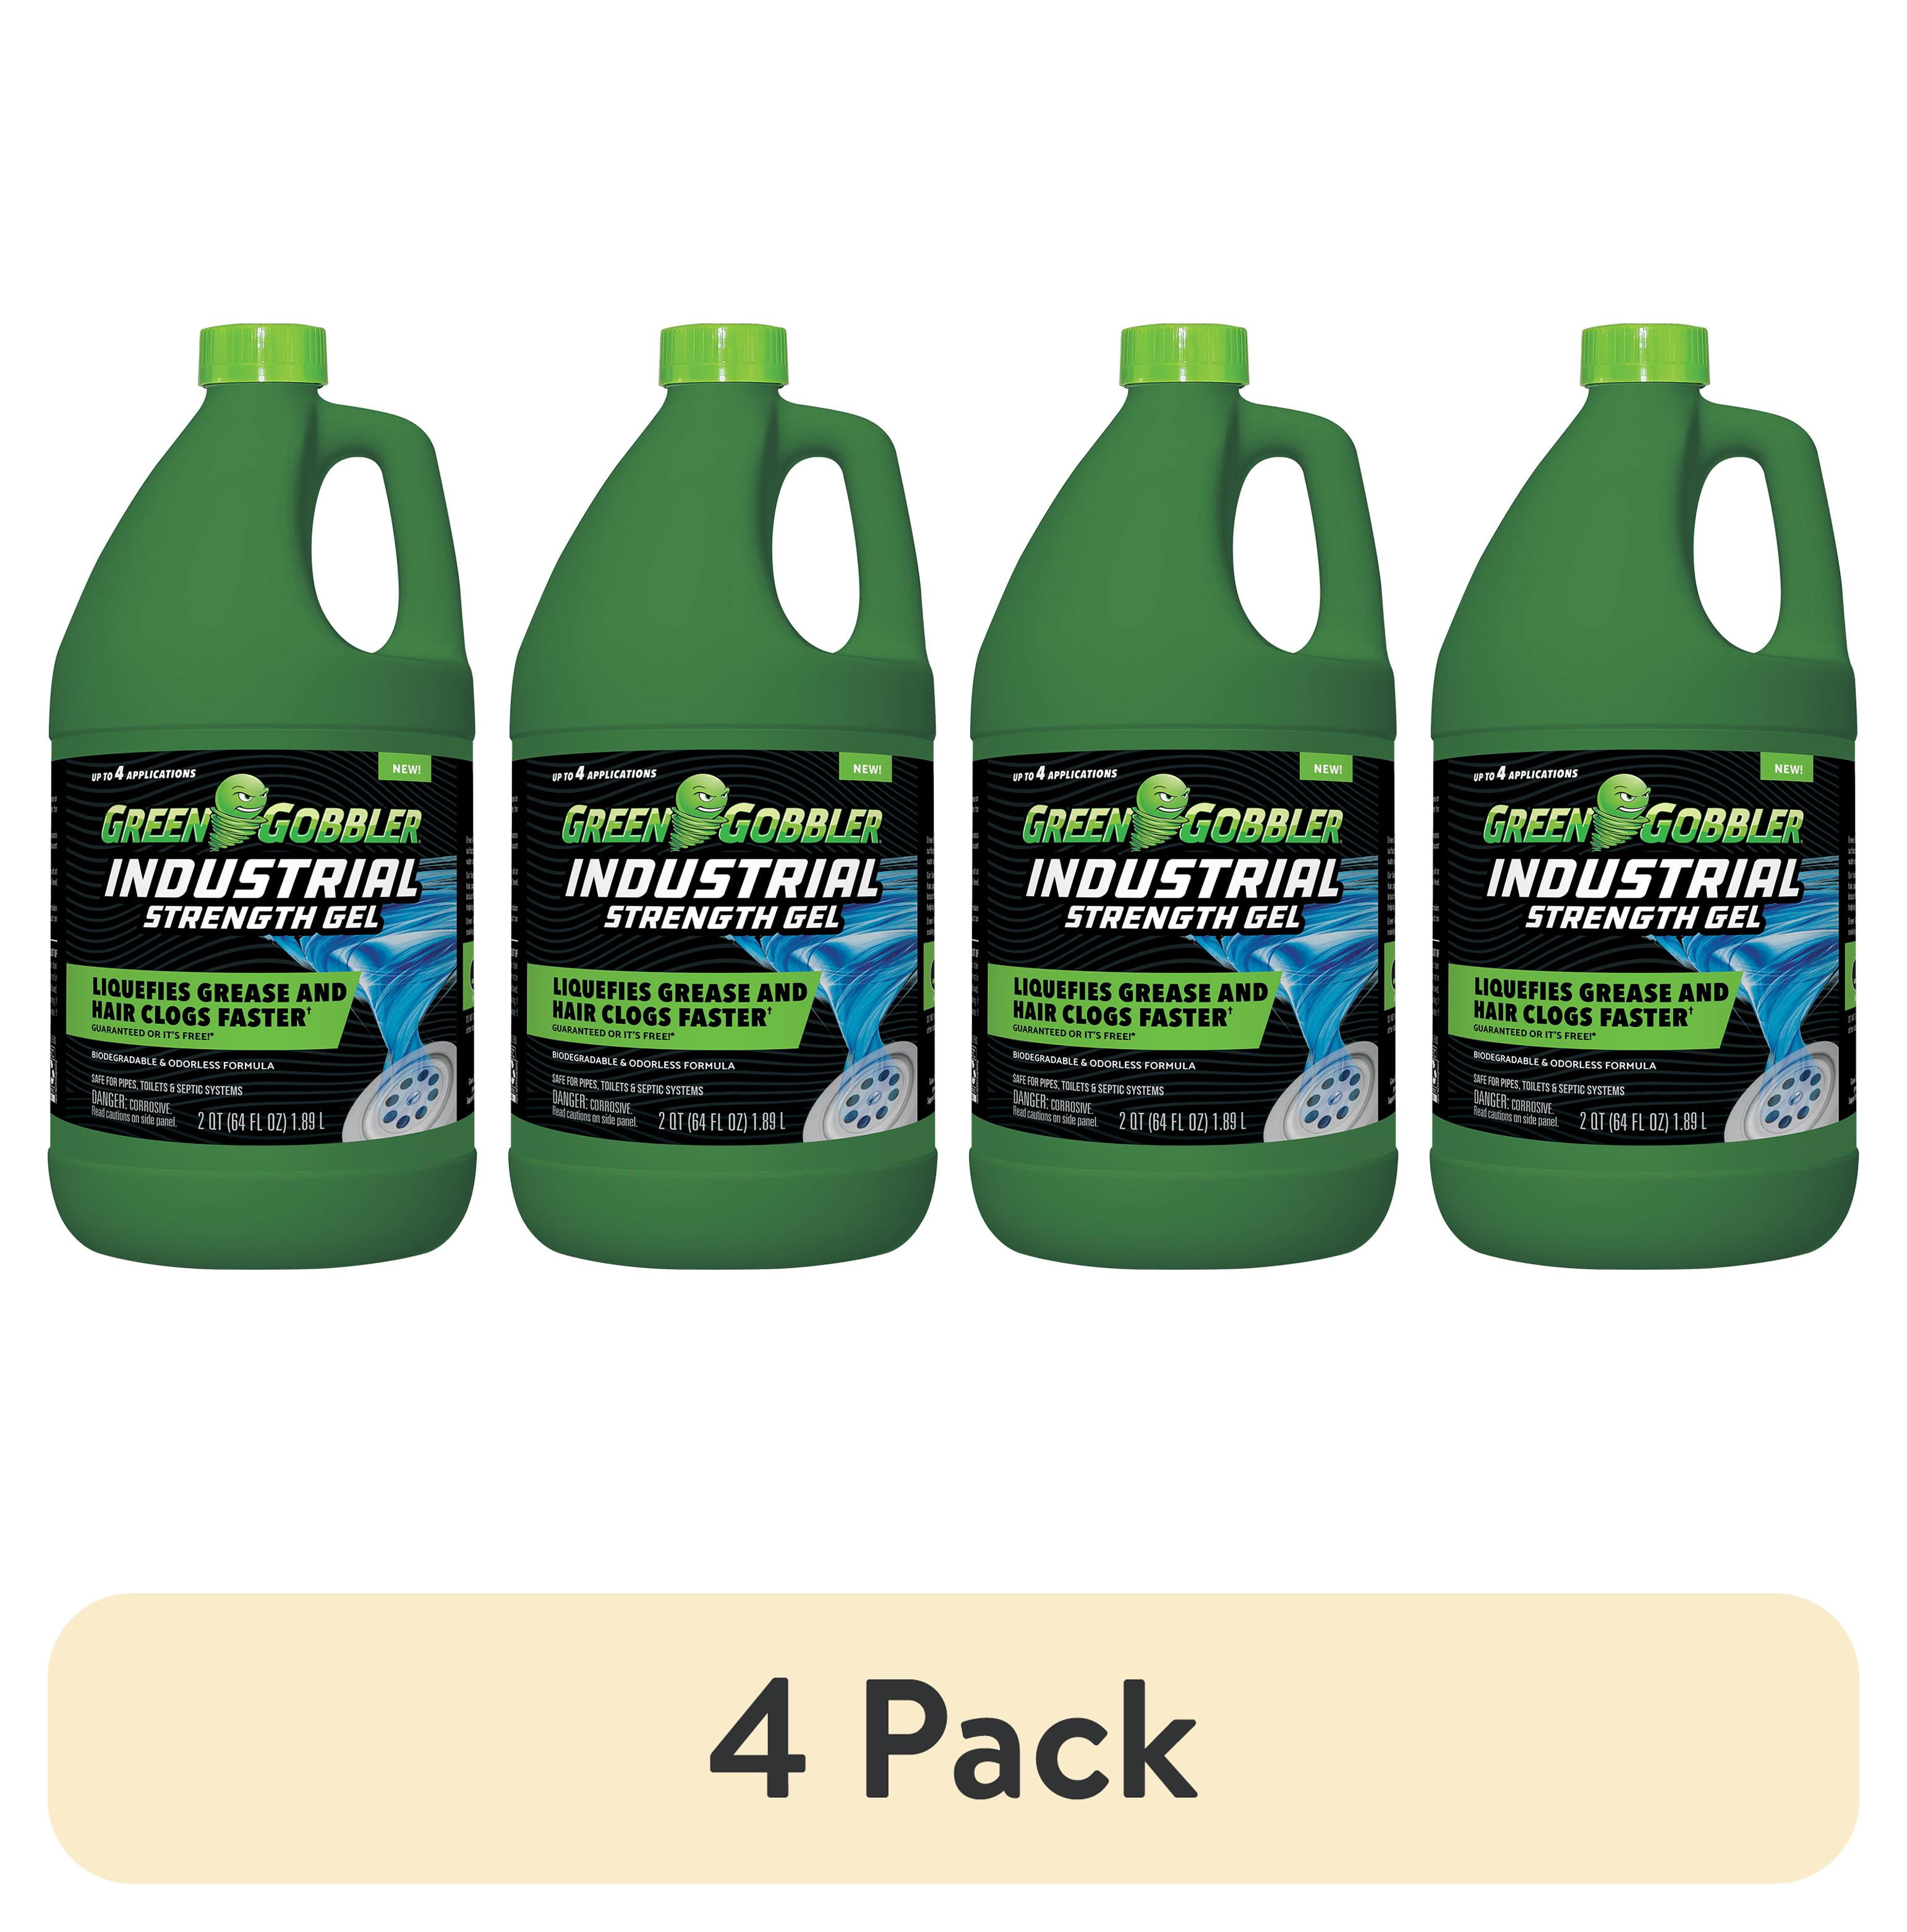 Green Gobbler - Safer, Stronger Cleaning Products